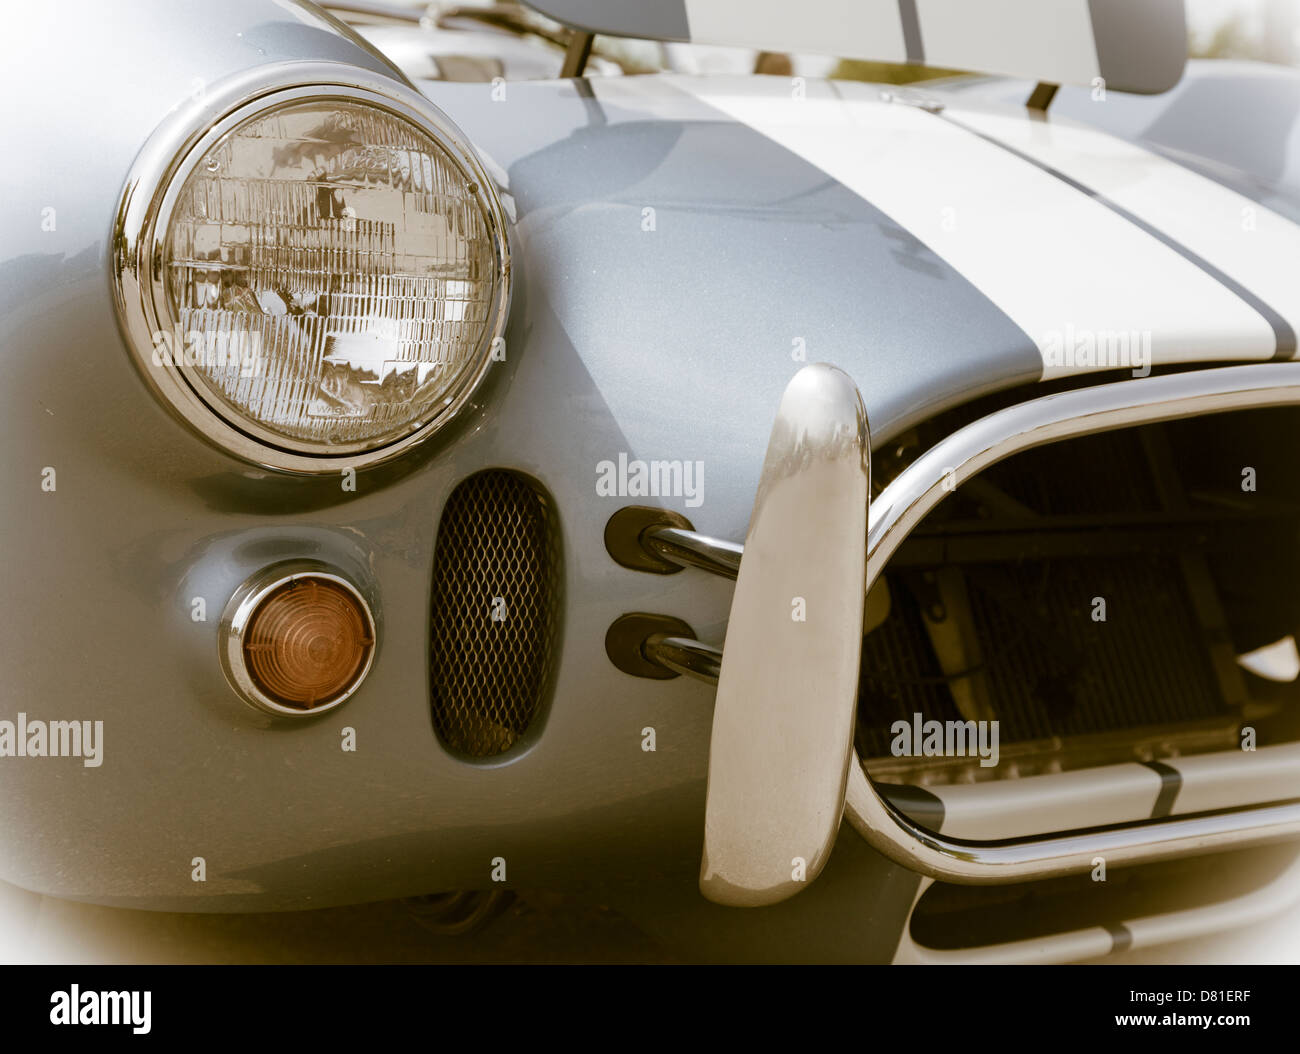 Classic sports car details Stock Photo